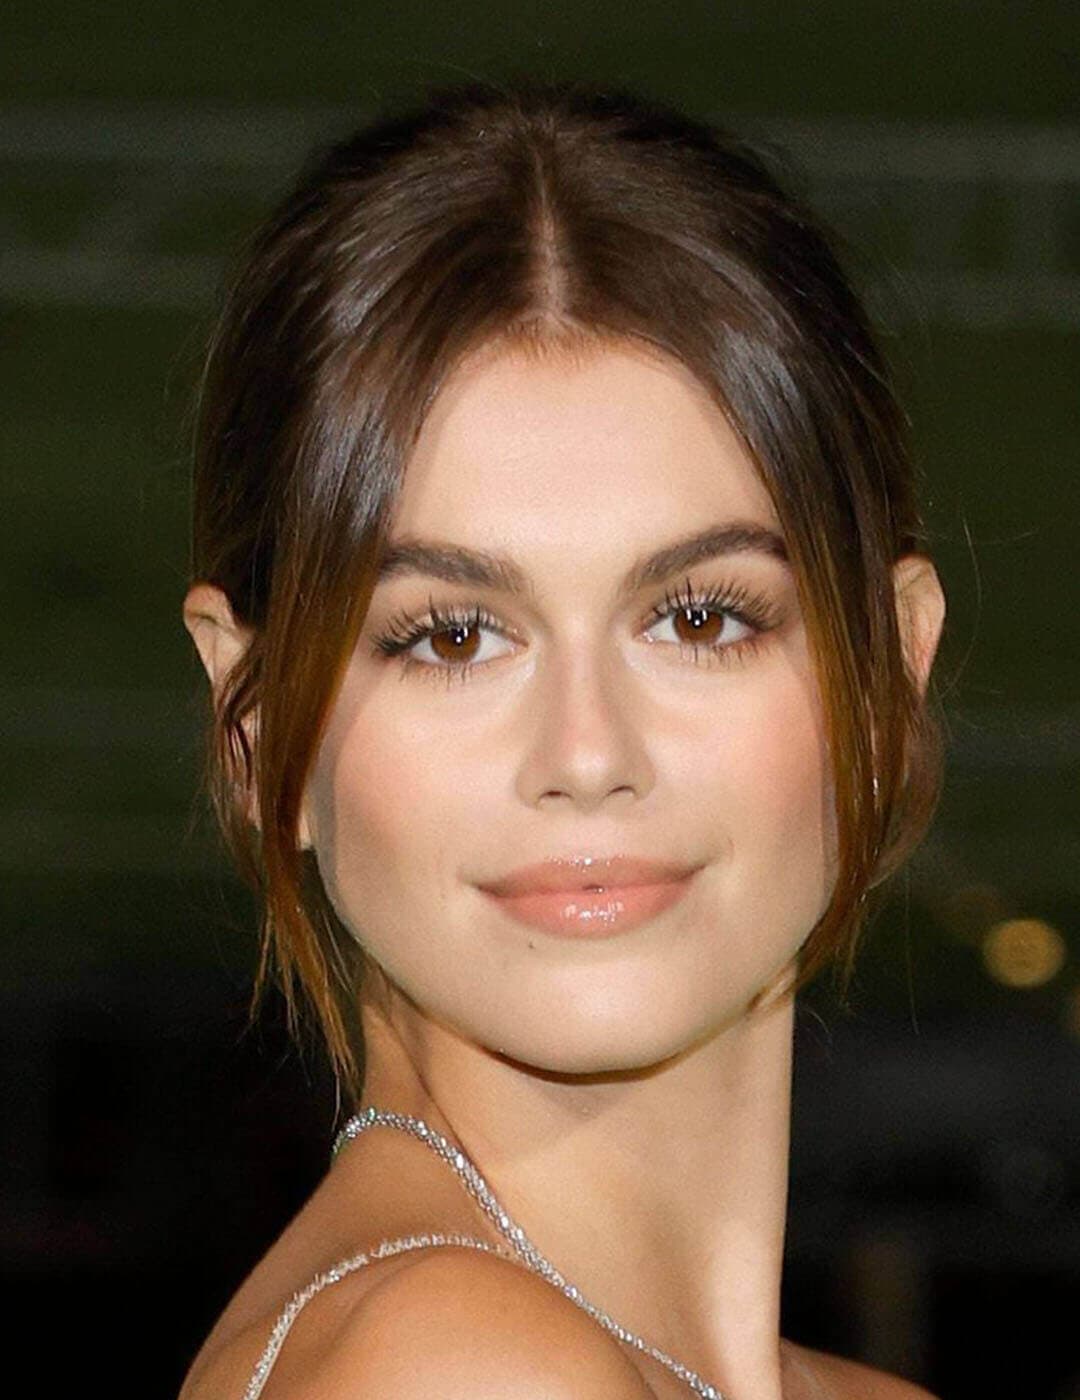 A photo of Kaia Gerber in her charming smile using a nude-colored lipstick in her updo hairstyle with two side bangs